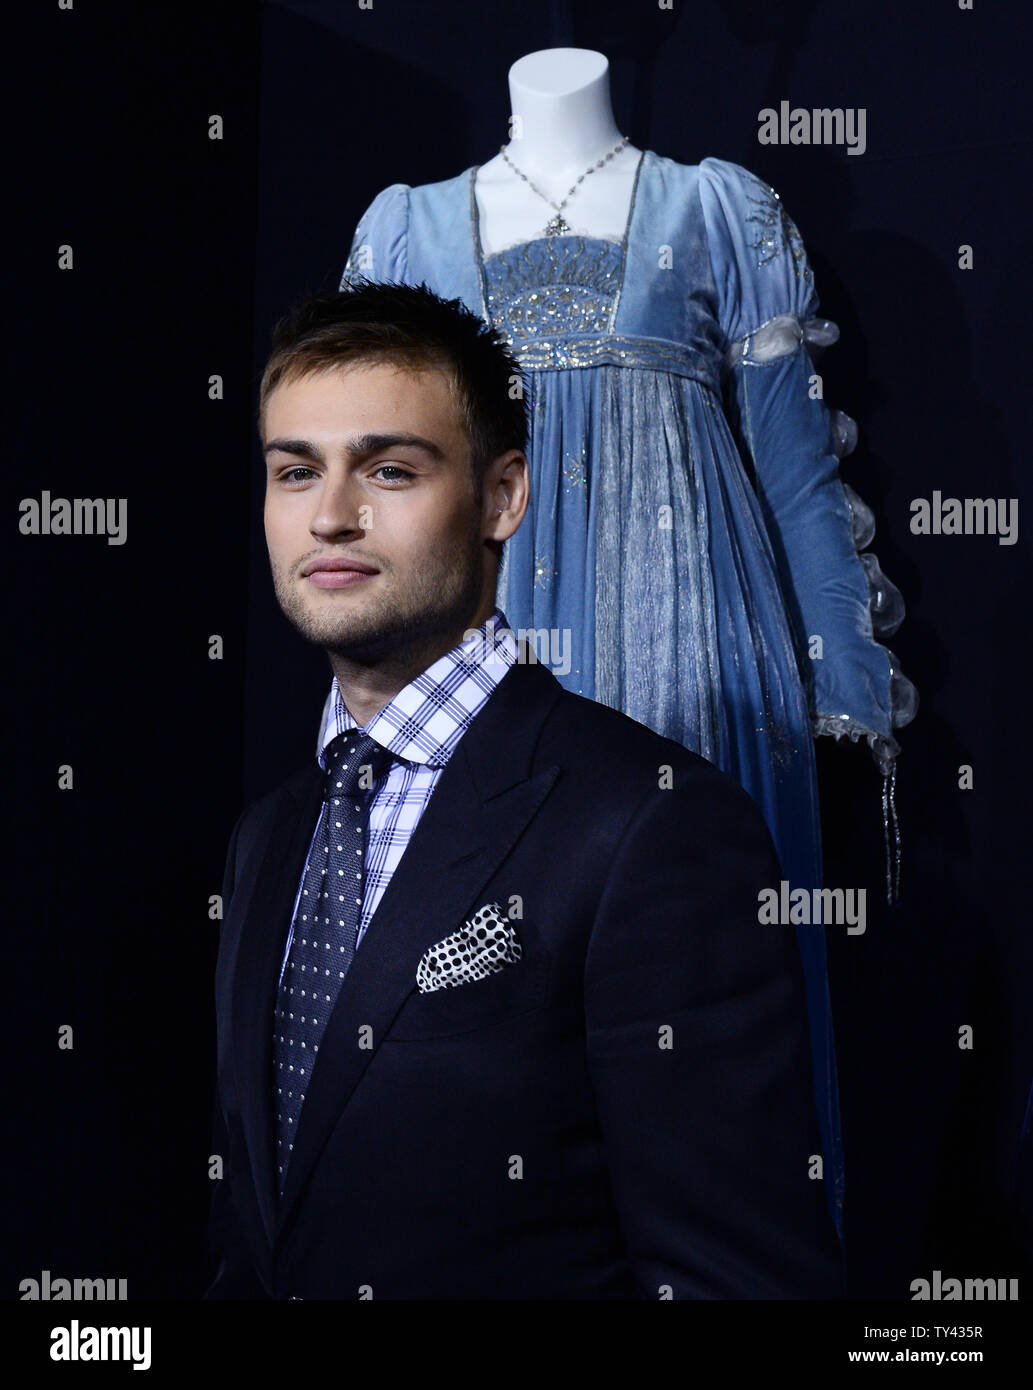 Cast member Douglas Booth attends the premiere of the motion picture romantic drama 'Romeo and Juliet' at the ArcLight Cinerama Dome in the Hollywood section of Los Angeles on September 24, 2013. The film is based on William Shakespeare's tragedy about two young star-crossed lovers whose deaths ultimately reconcile their feuding families.  UPI/Jim Ruymen Stock Photo